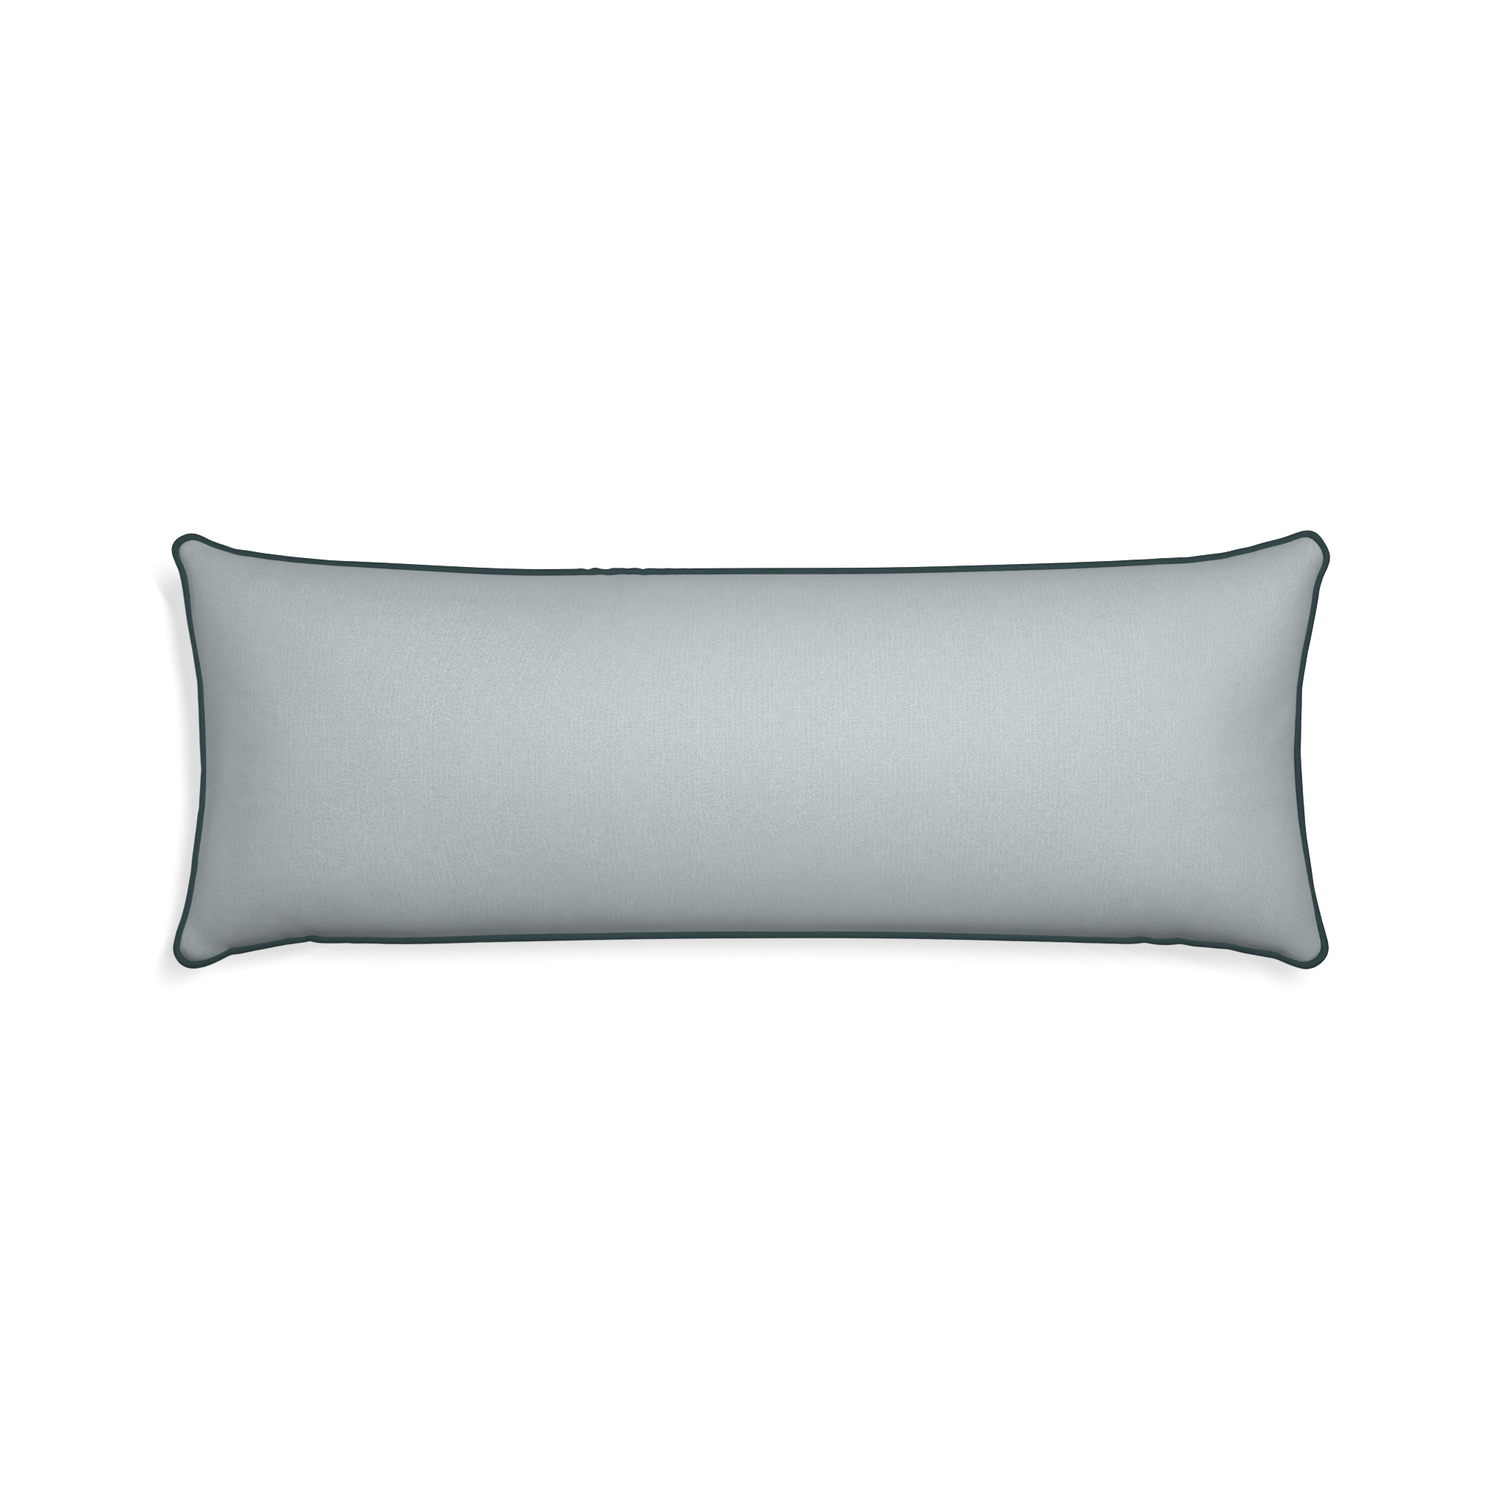 Xl-lumbar sea custom grey bluepillow with p piping on white background